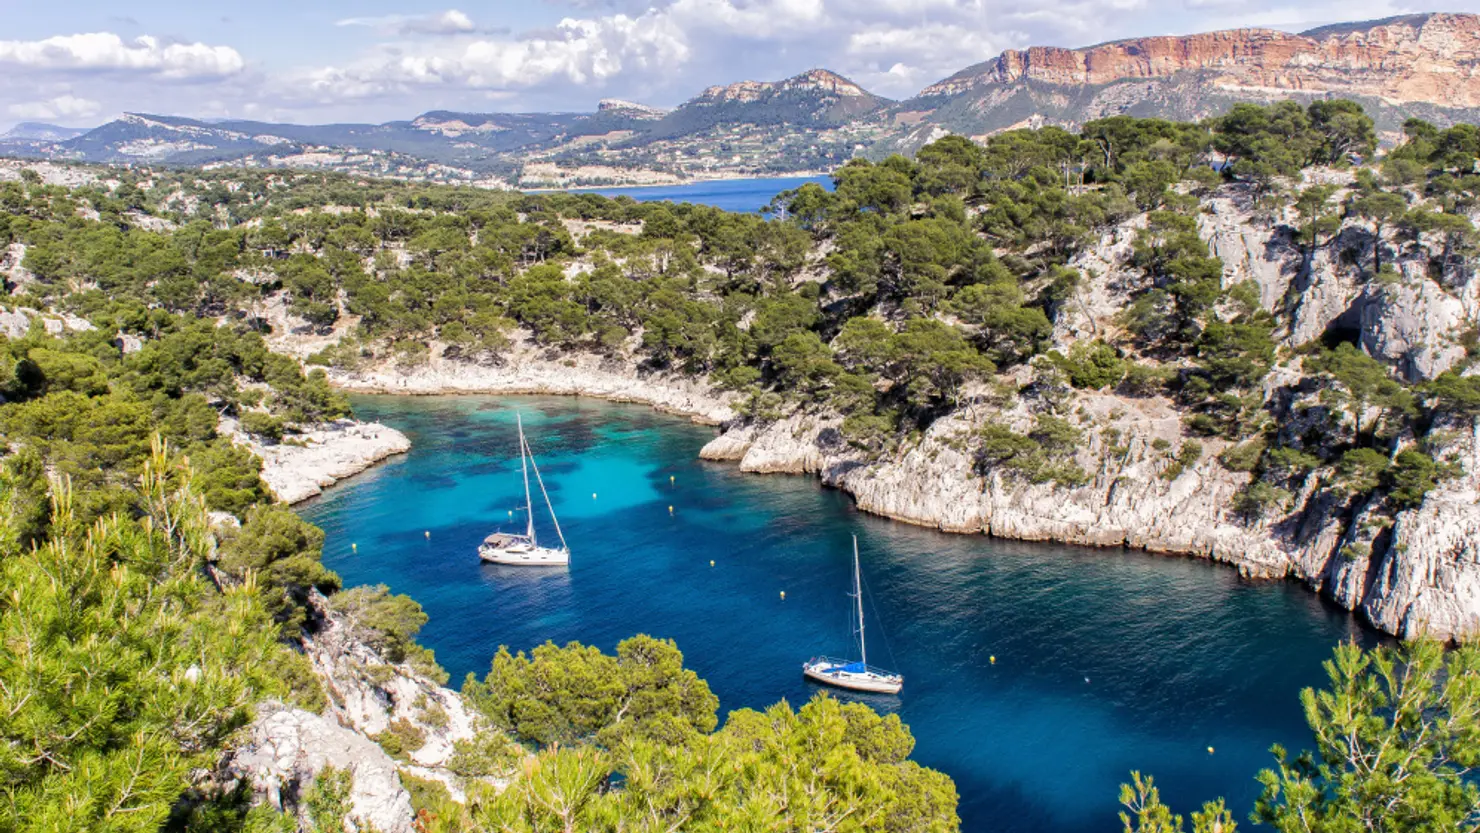 Calanques National Park near Marseille - Magic Limestone Coastline in Southern France 